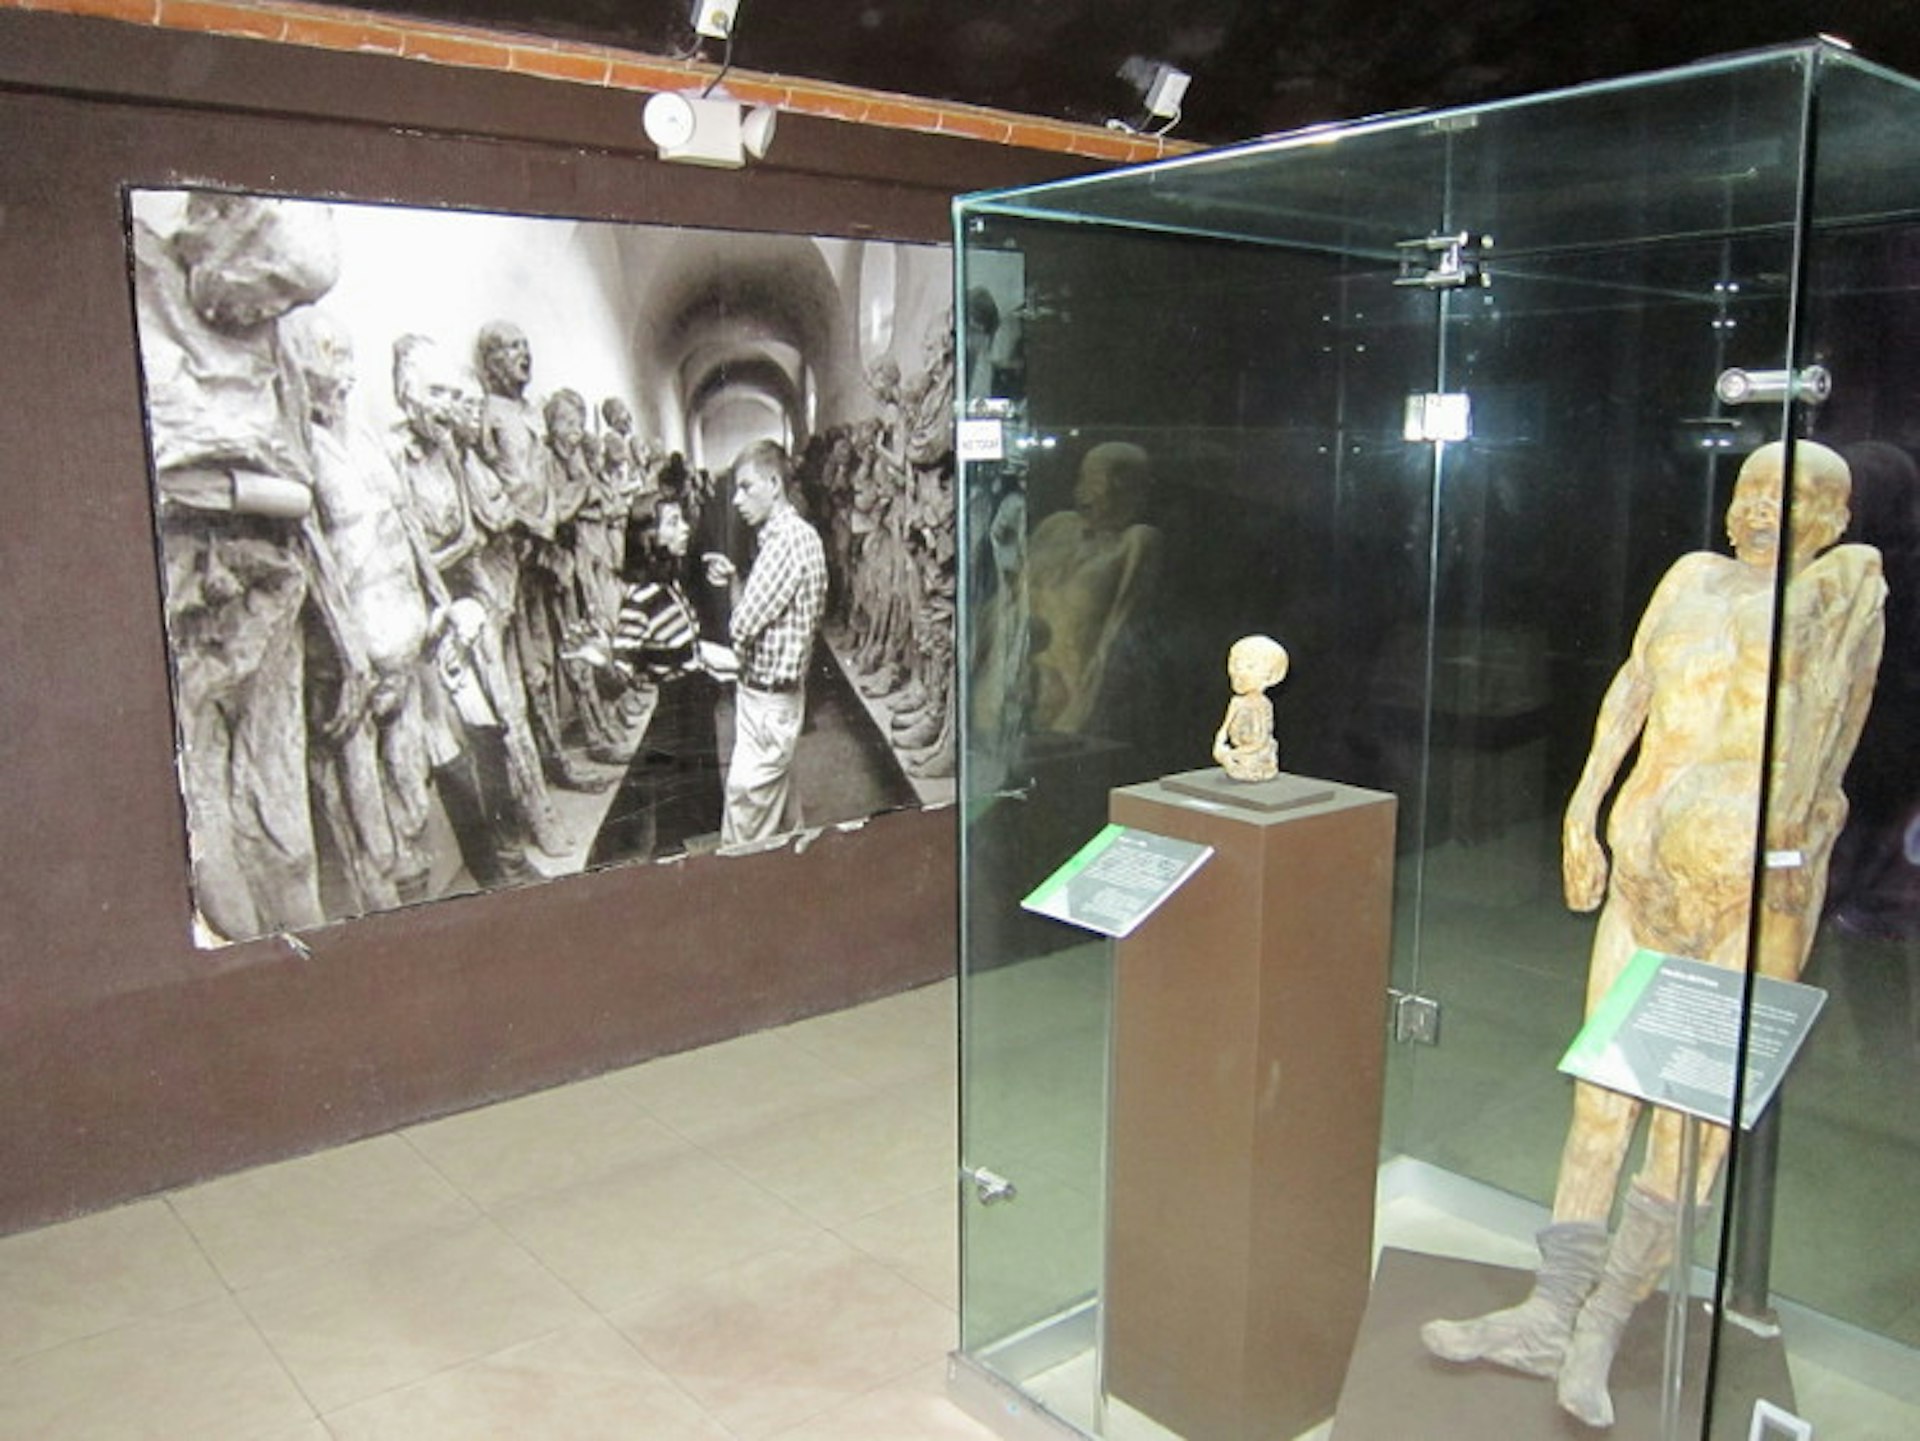 The Mummy Museum is Guanajuato's creepiest attraction. Image by Kate Armstrong / Lonely Planet